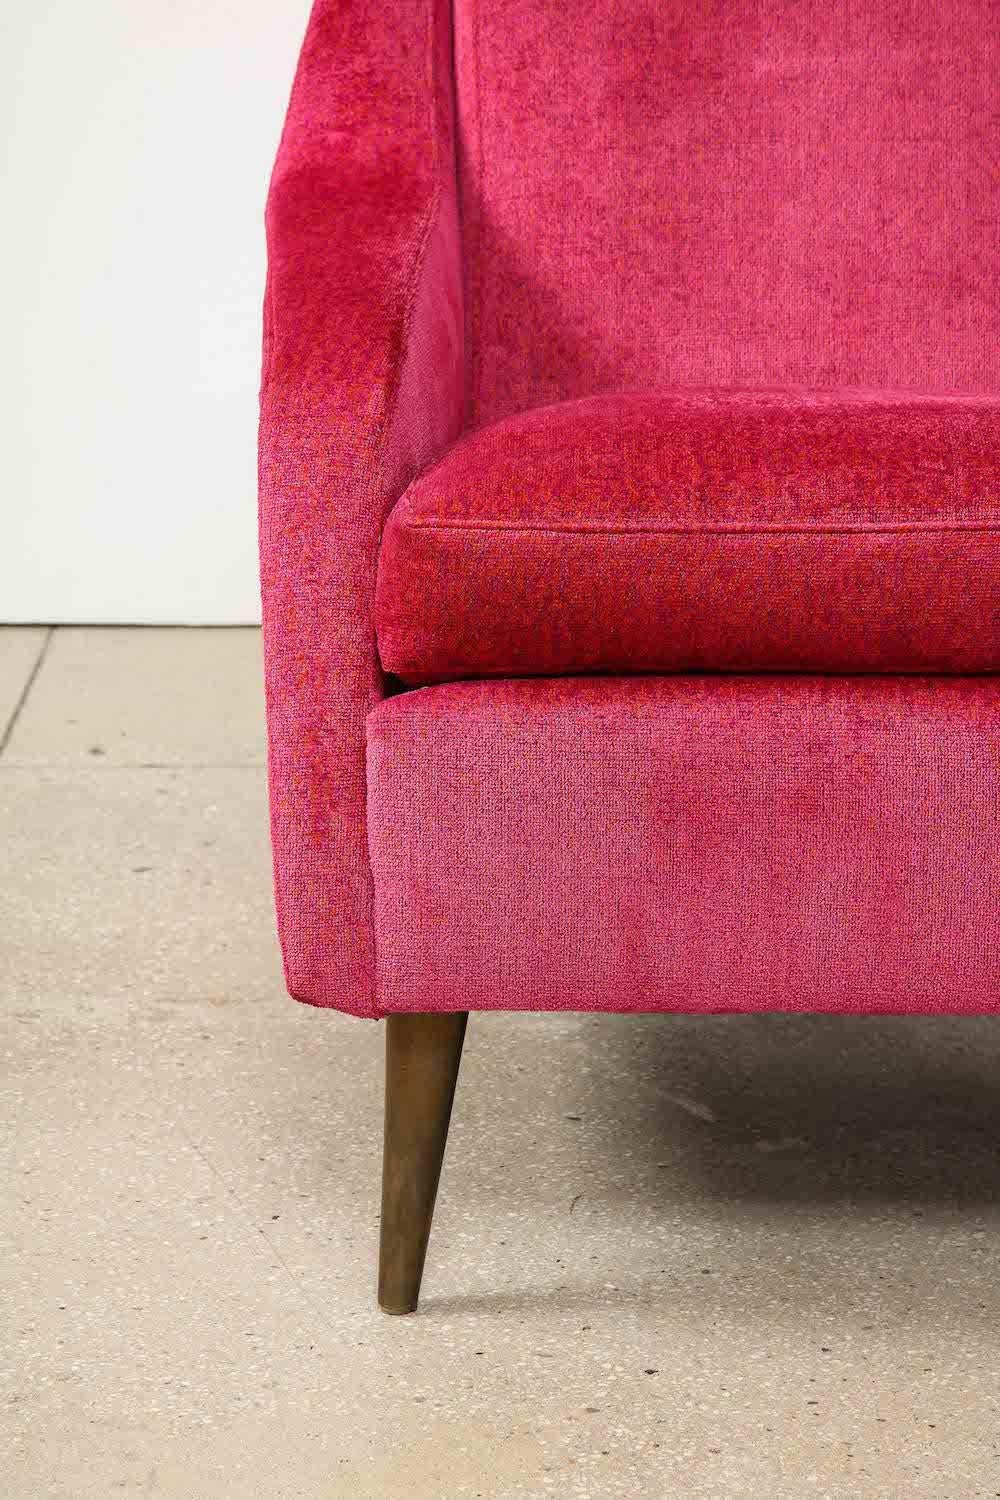 Wood, fabric, brass. Sculptural lounge chair, fully upholstered in fuchsia-colored velvet, with deep seat and oxidized brass-cone legs. Produced by Cassina. This example is particularly desirable with the brass-cone legs. Published: Il Mobile